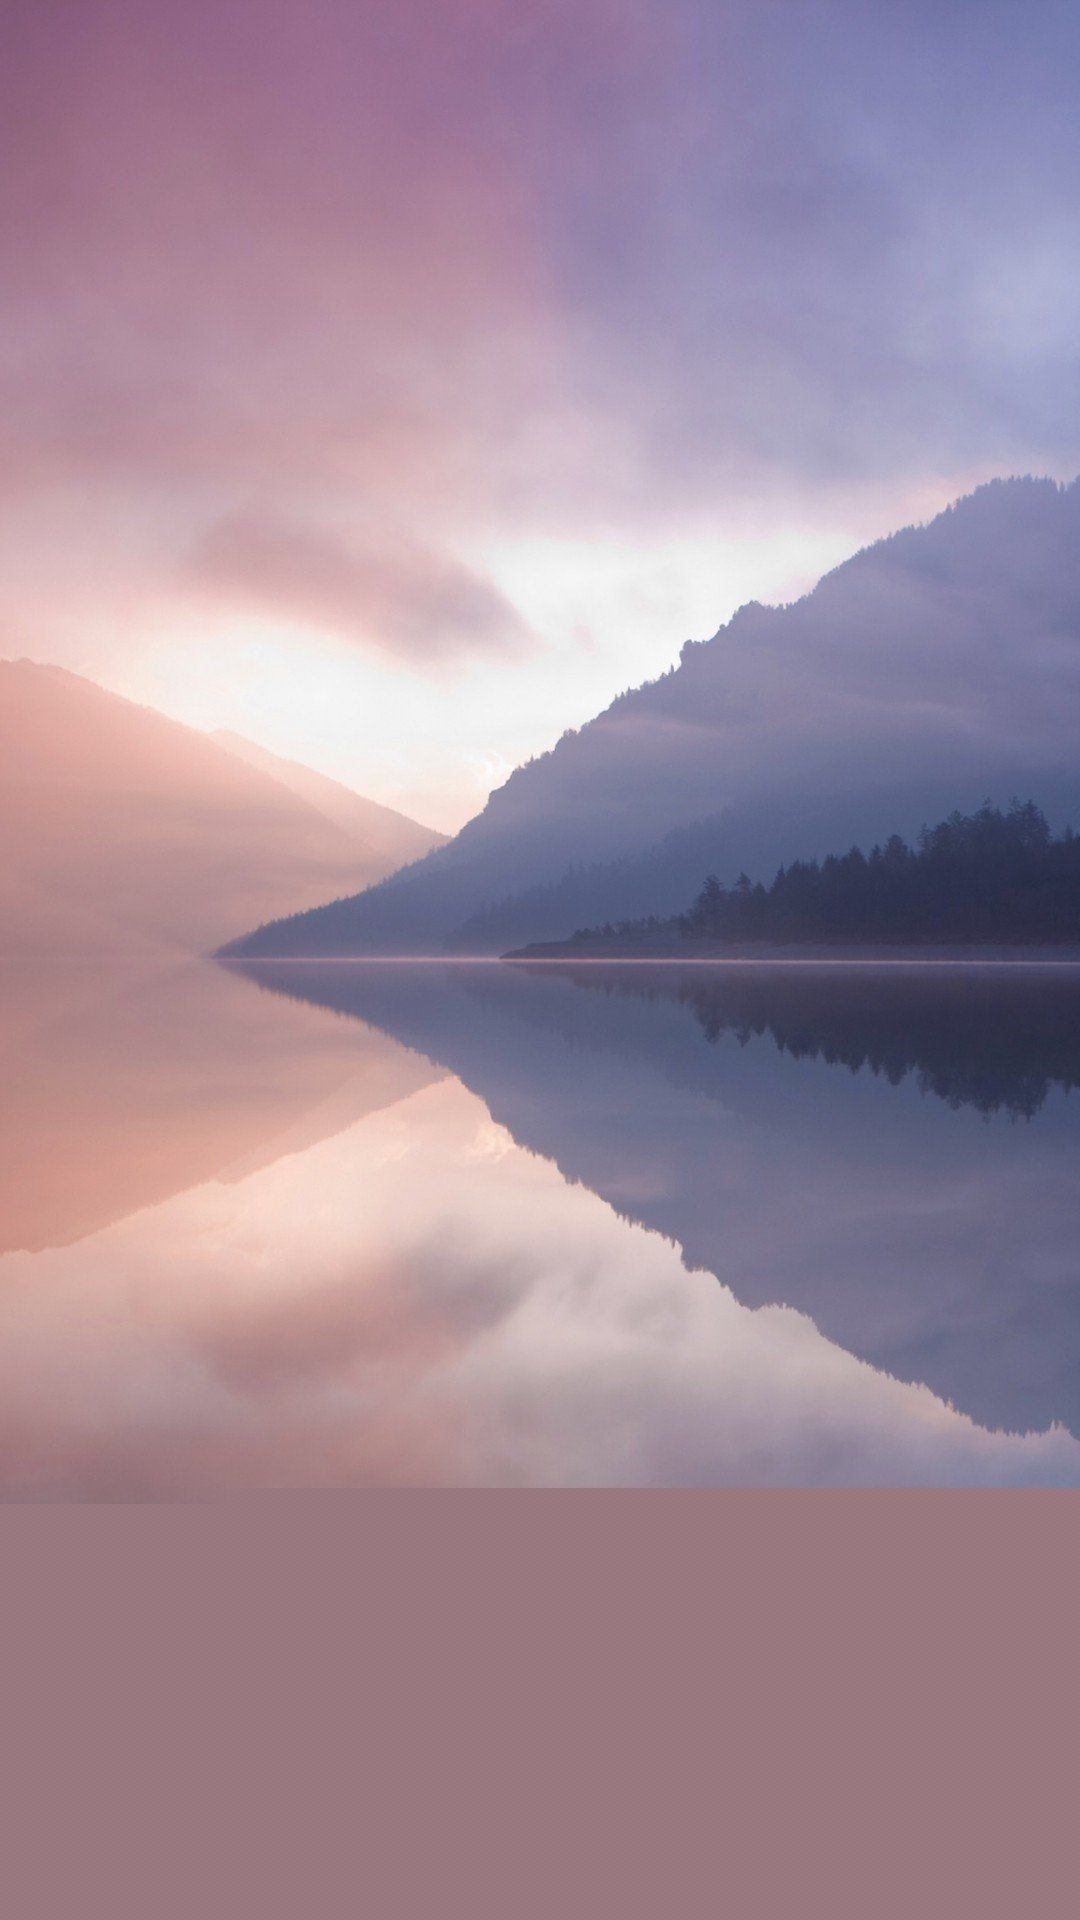 IPhone wallpaper of a calm lake with mountains in the background - Calming, lake